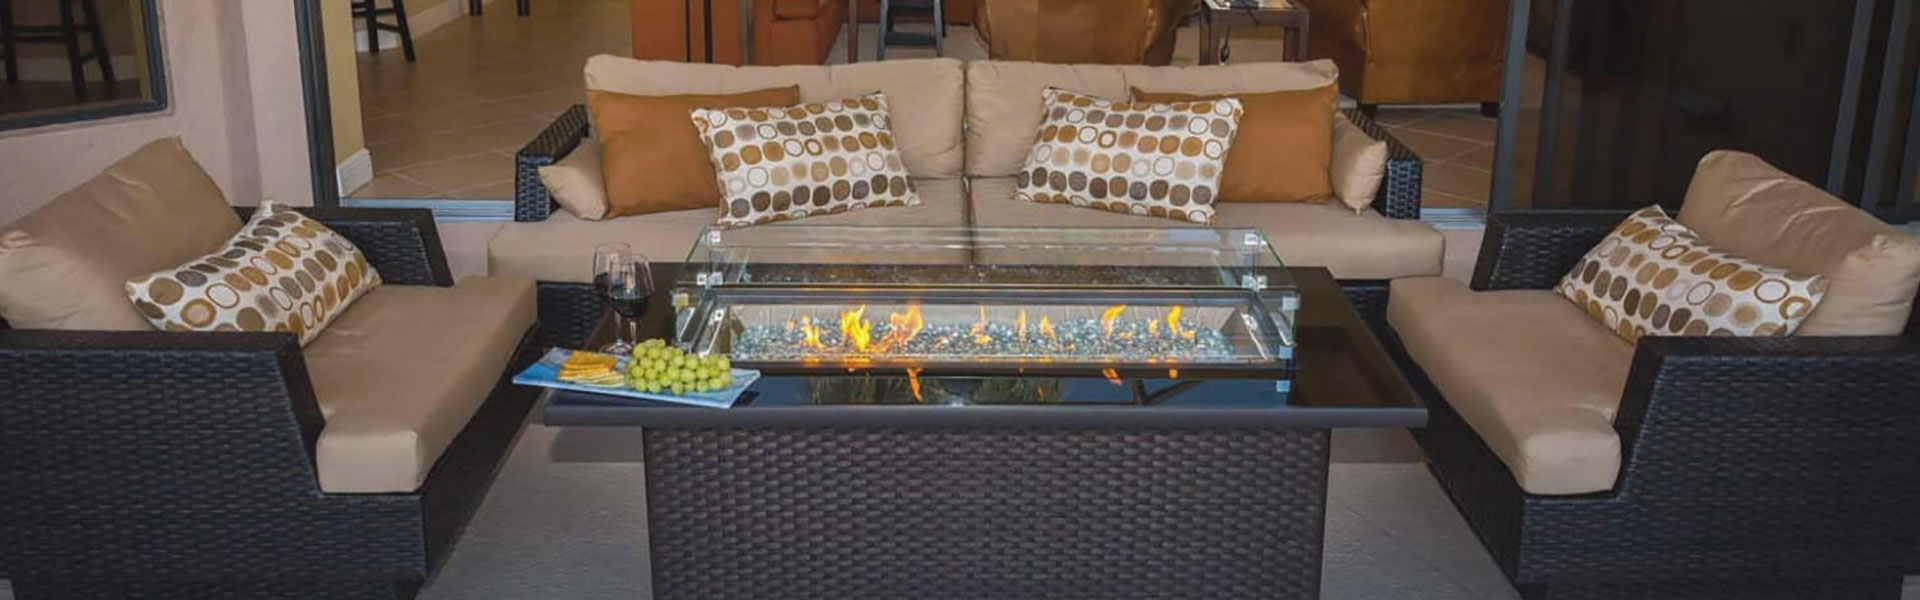 Outdoor Great Room Gas Firepits